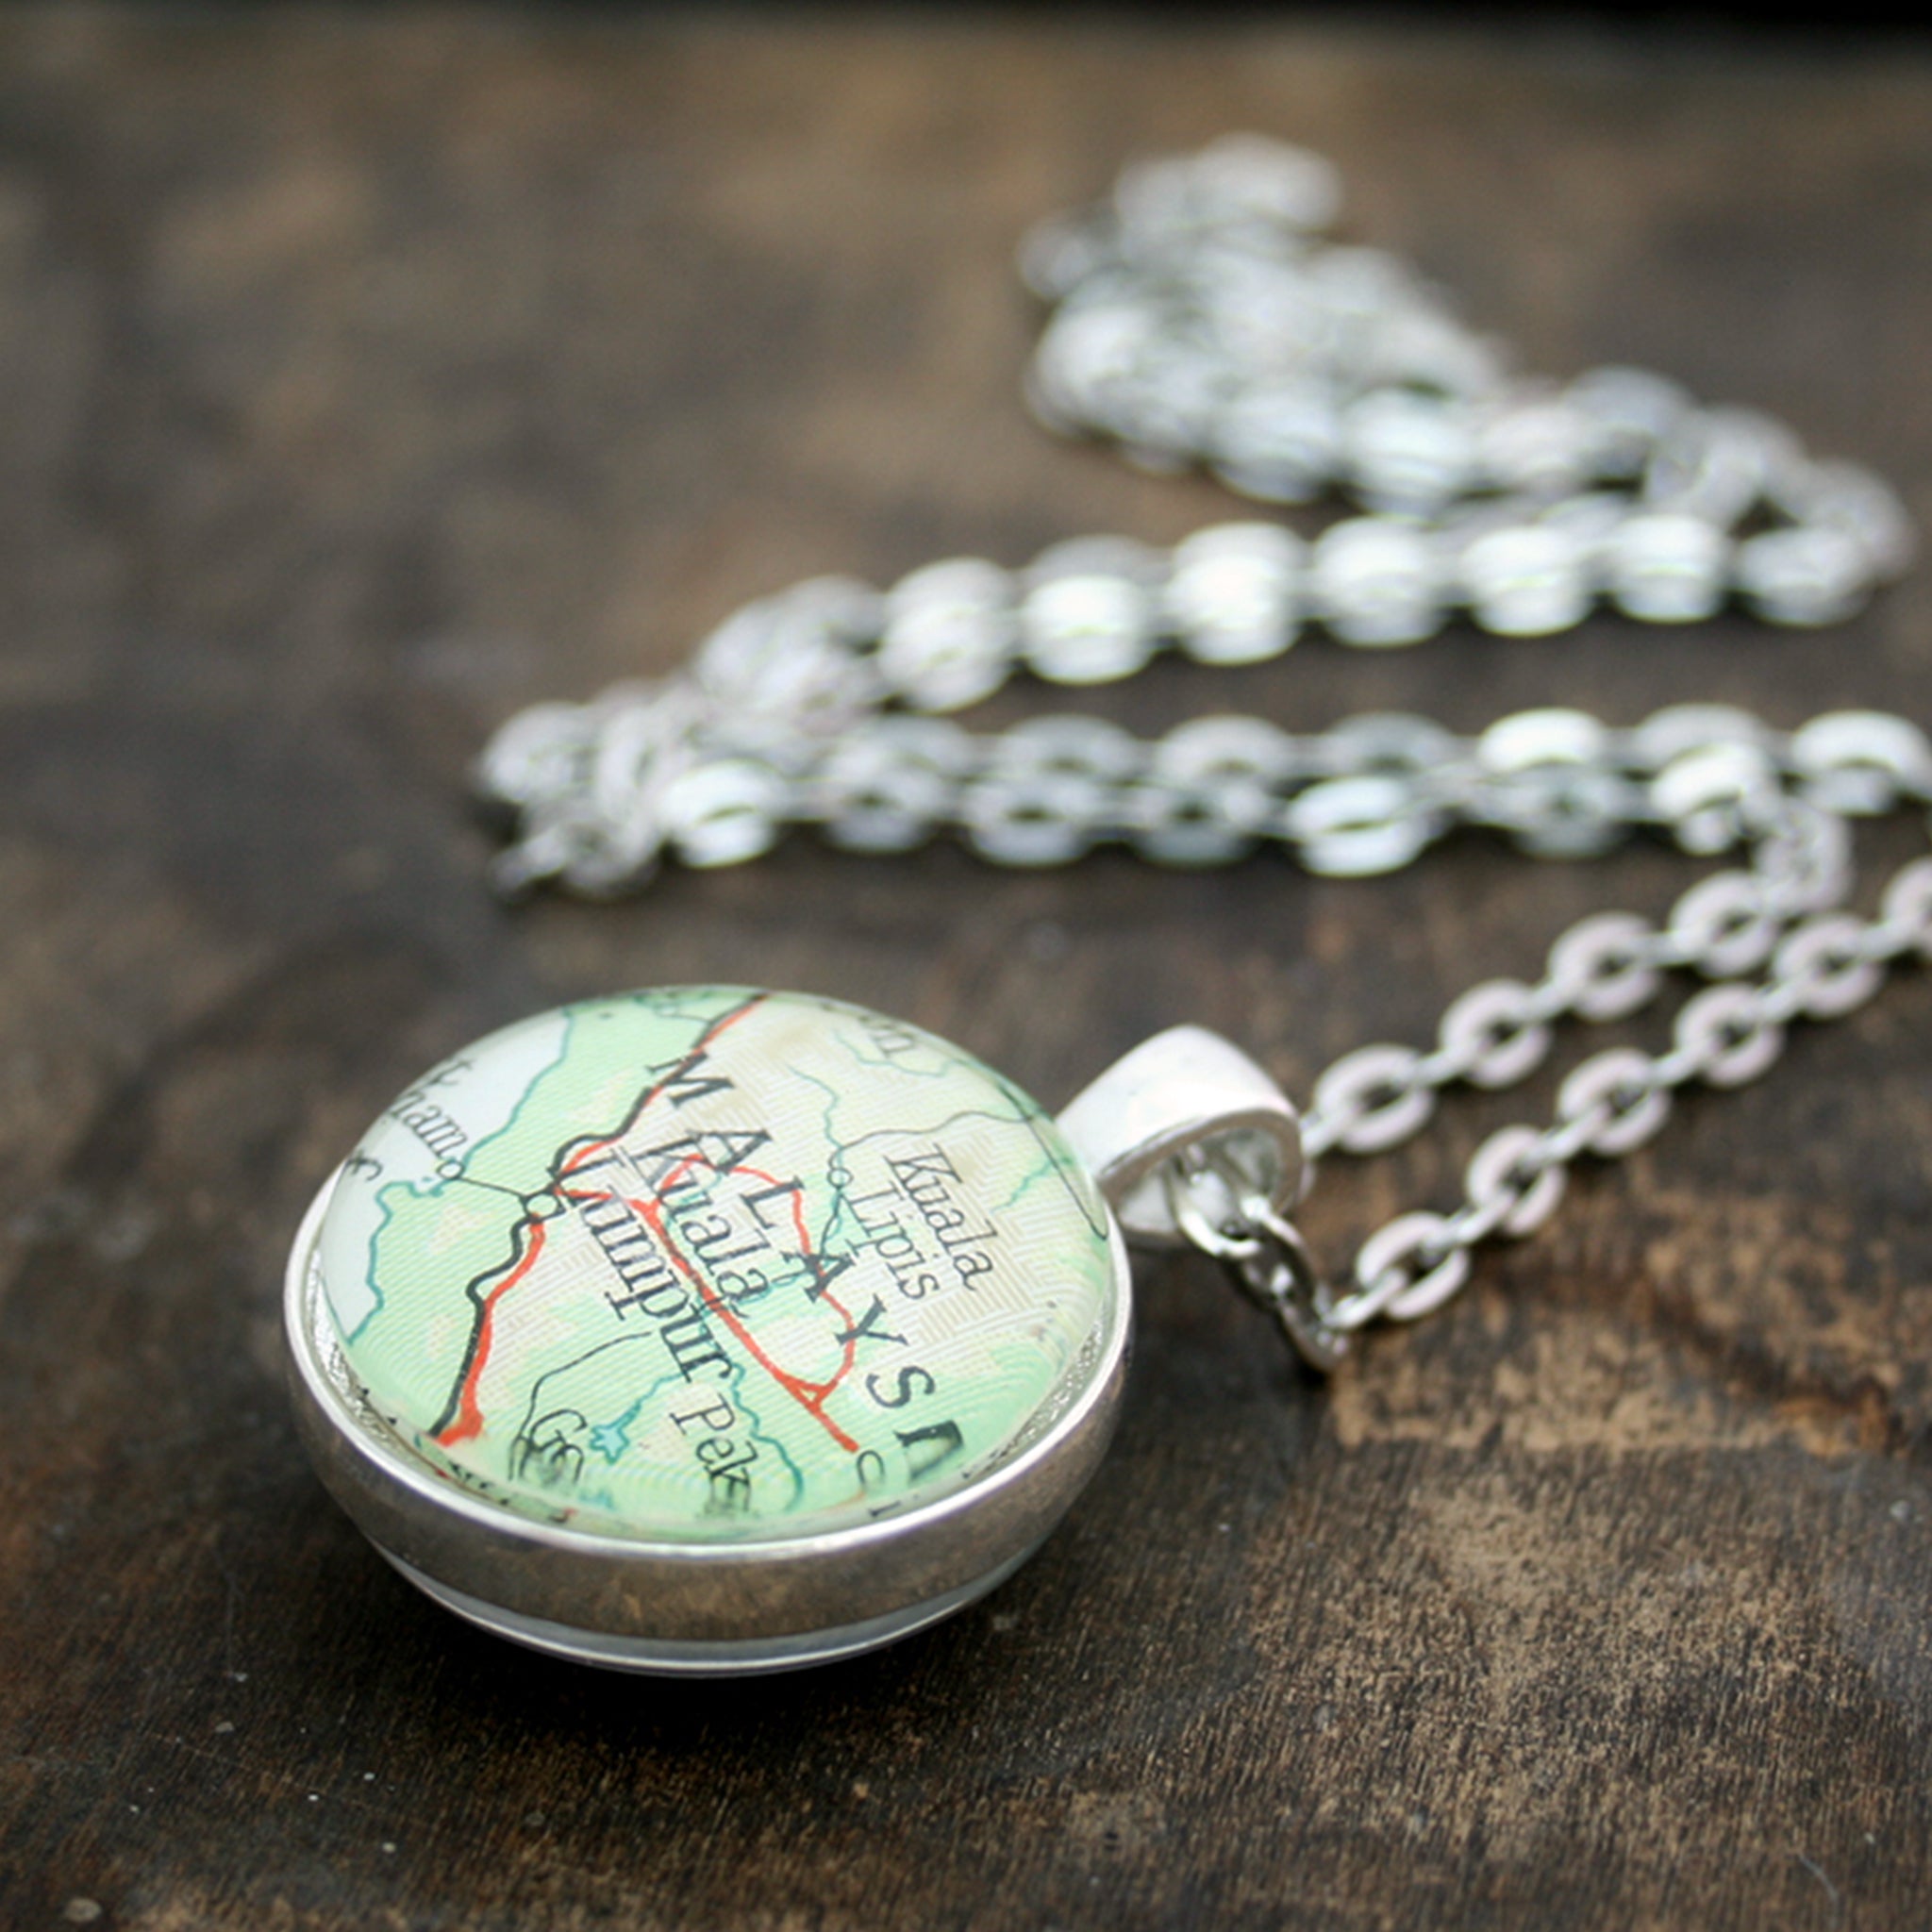 Silver tone double sided pendant necklace featuring map of Malaysia